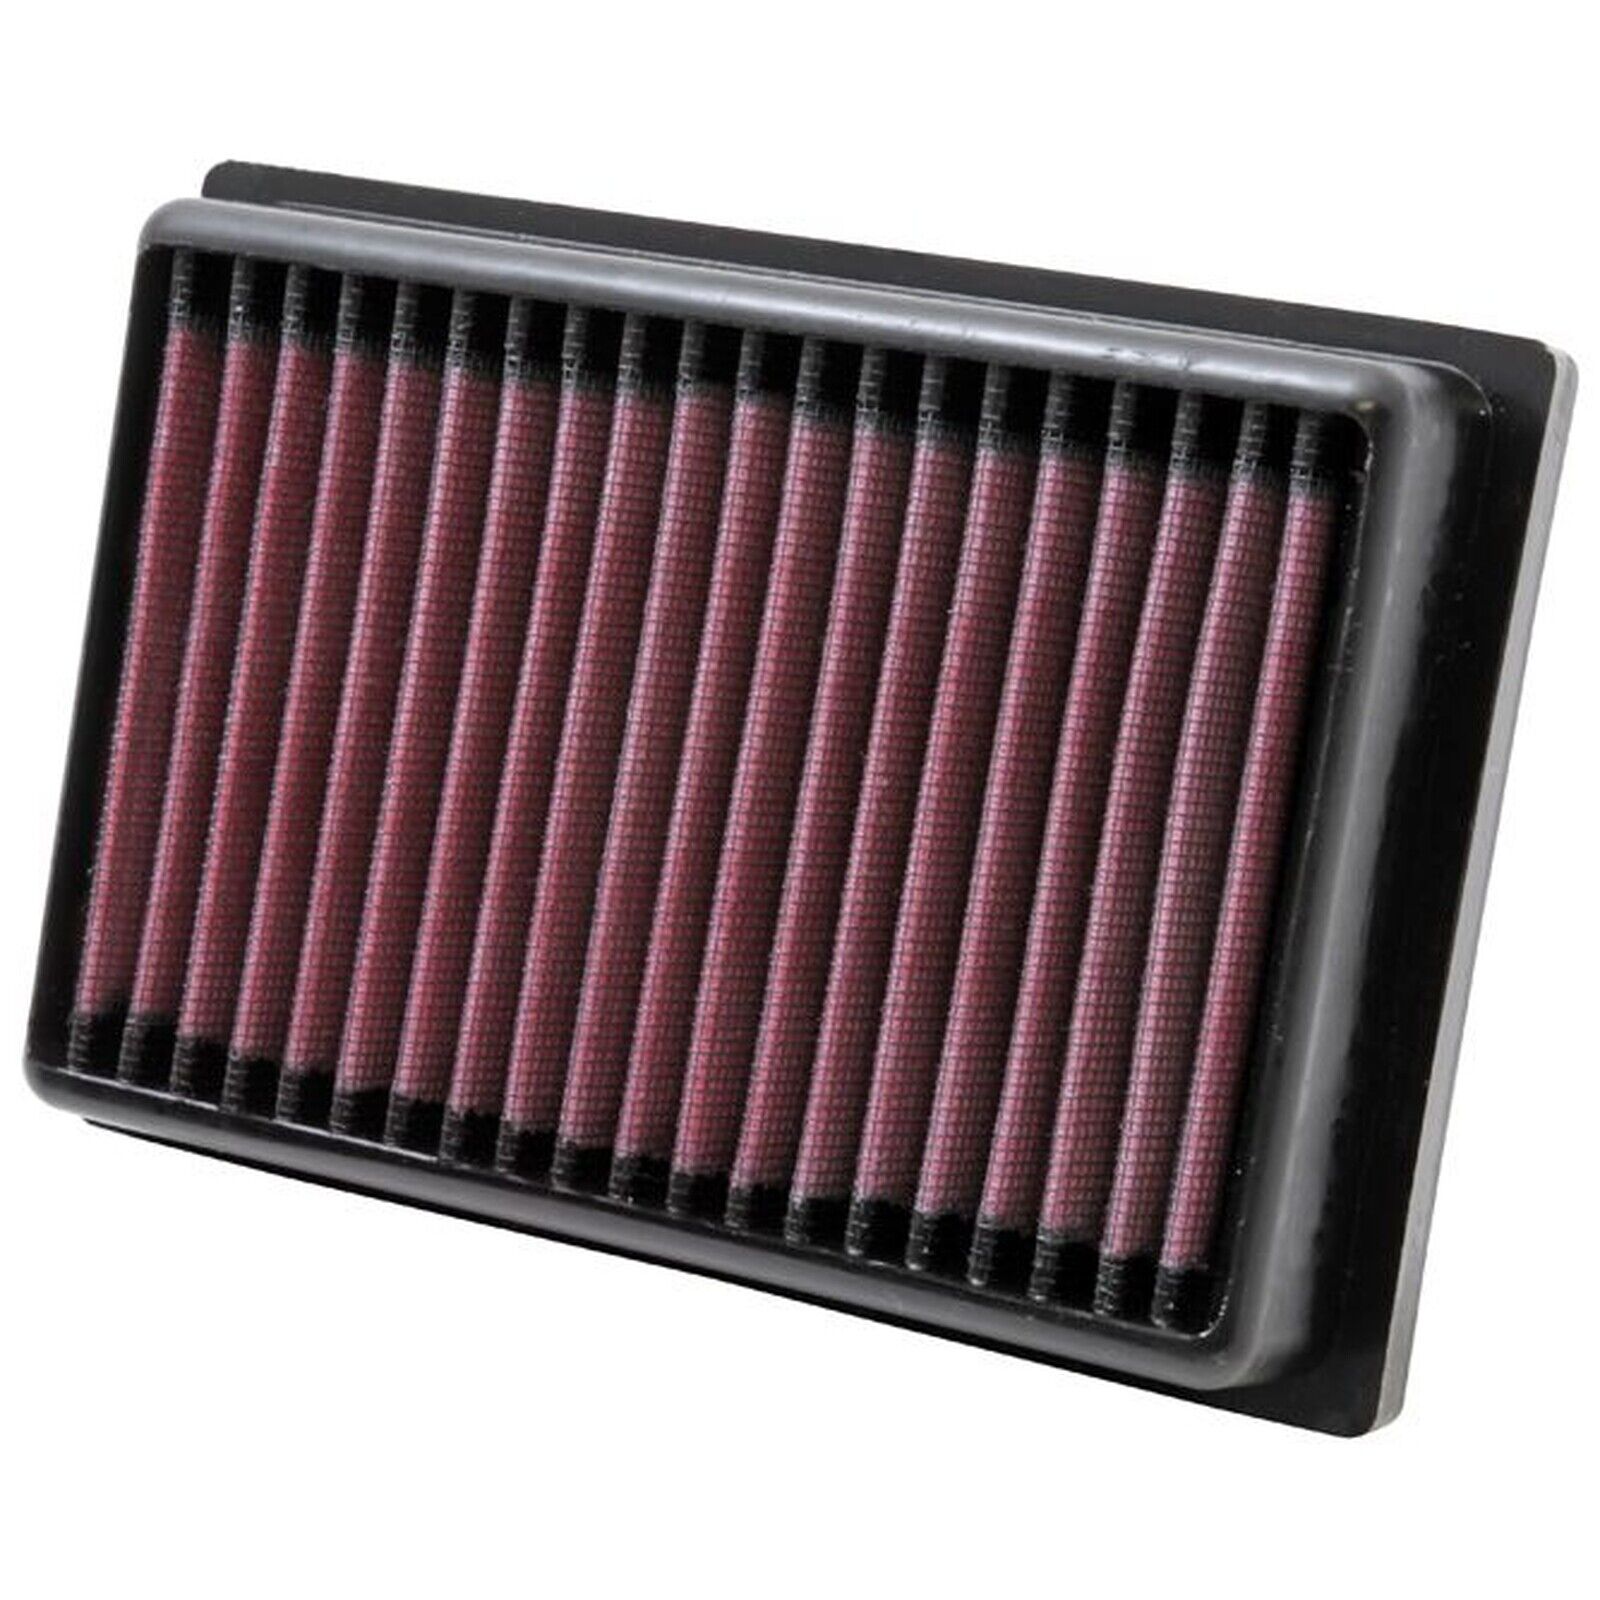 K&N Replacement Air Filter CM-9910 - Reusable - Low Maintenance - Easy Install